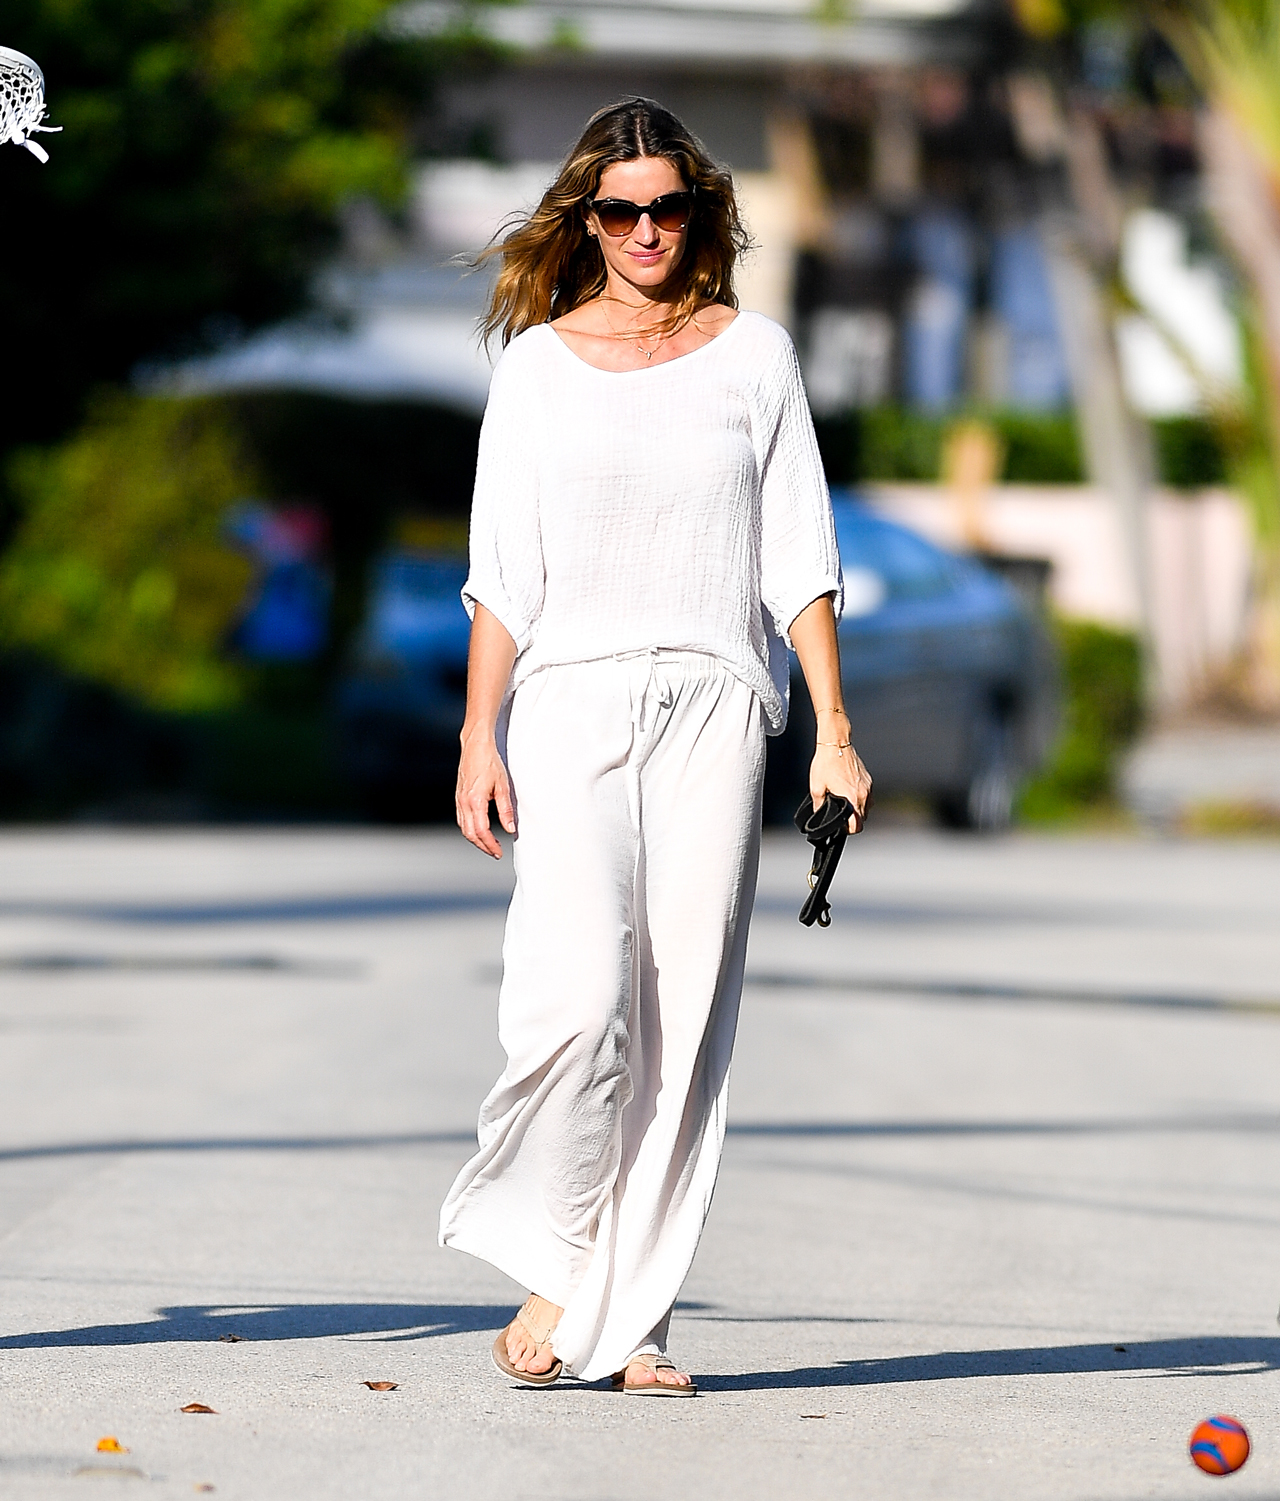 Gisele Bündchen Made These Ageless Fall Pants Look So Effortless